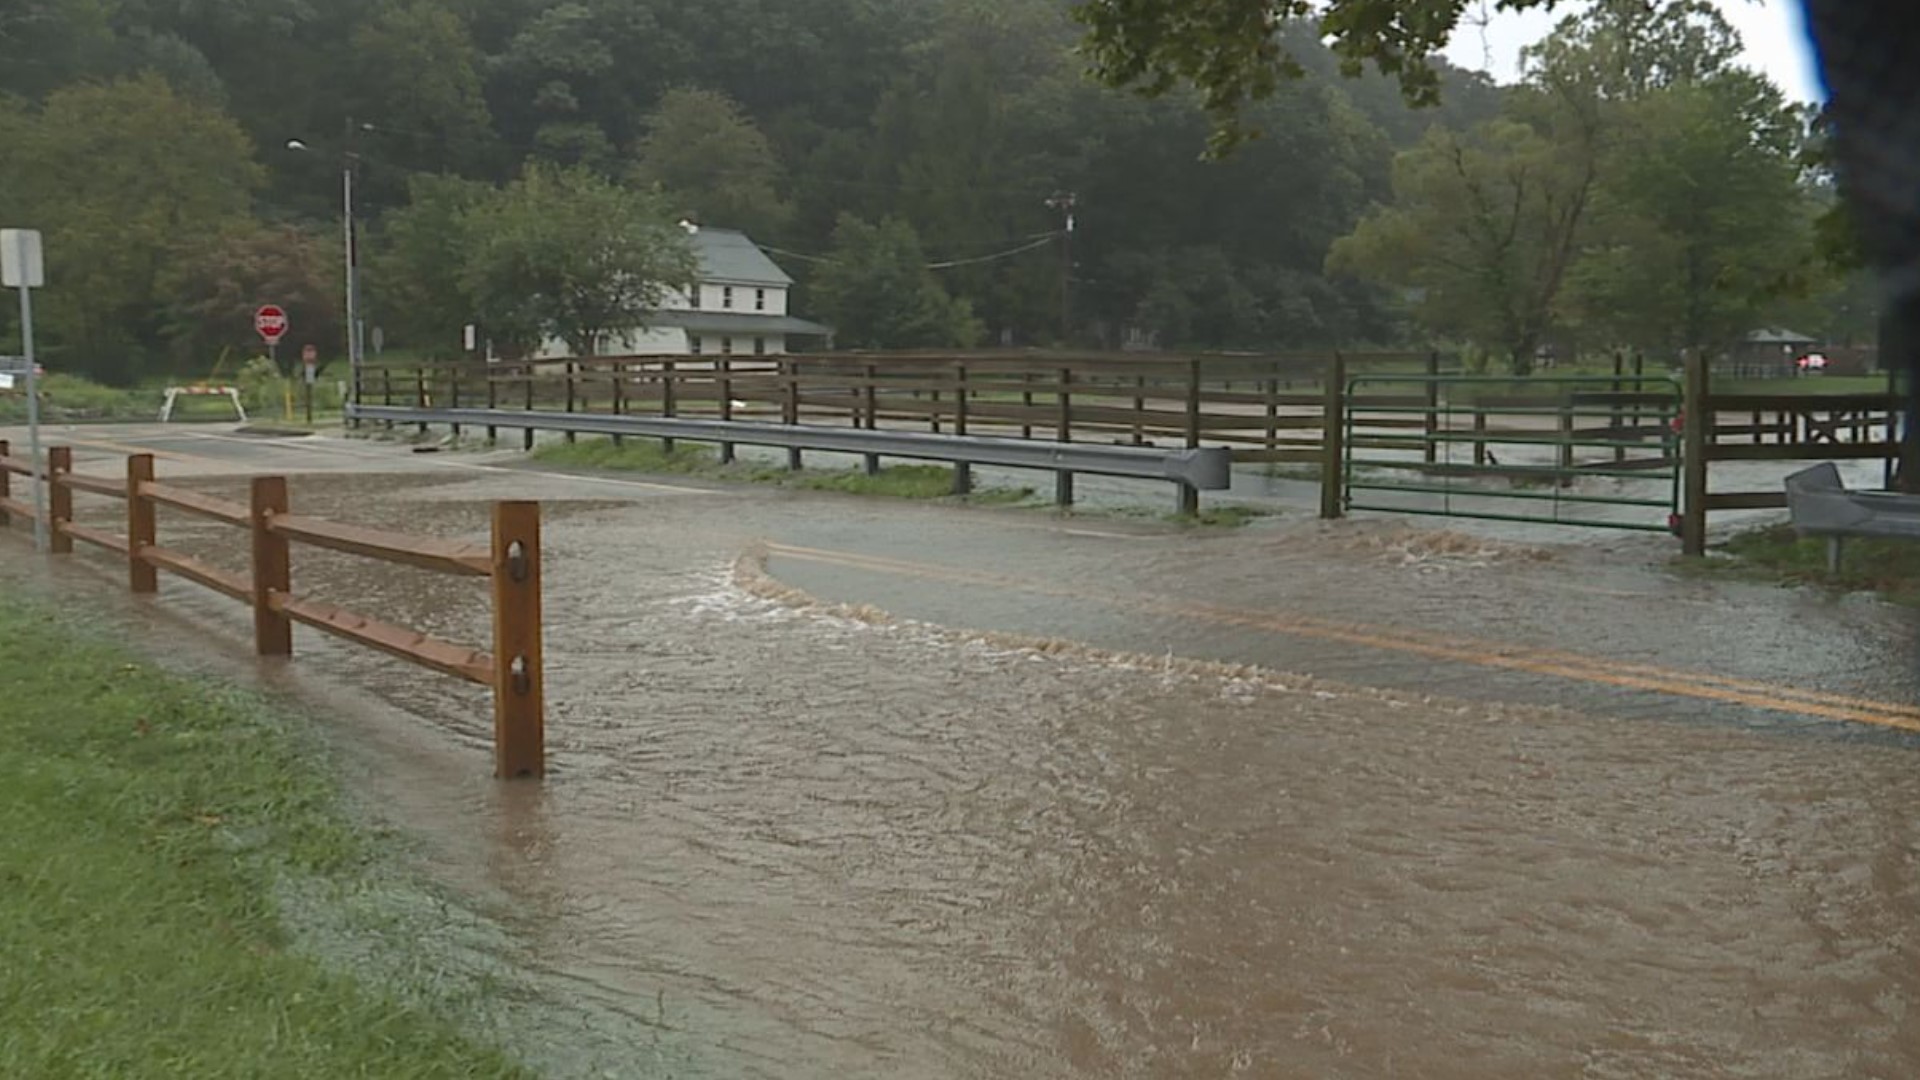 Wood Rd in Derry Township is among the roadways closed due to flooding. Pennsylvania leaders call this storm a 'multi-day' event